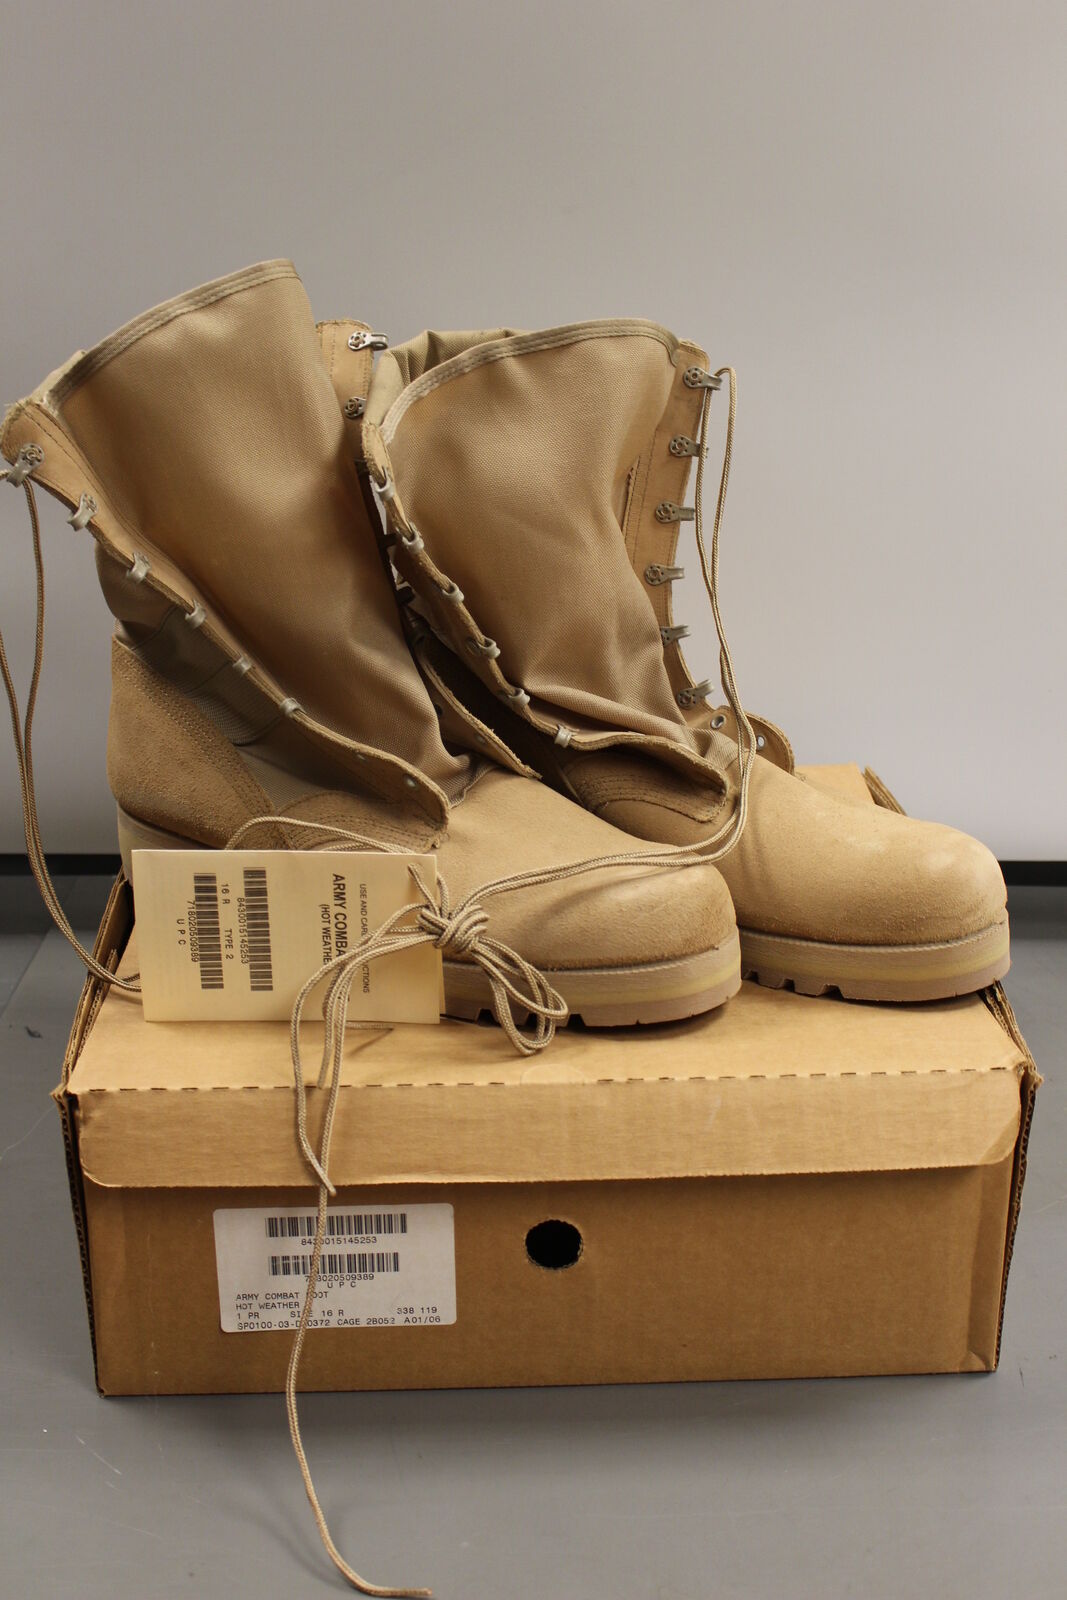 US Military Issued Tan Combat Boots, Size: 16R, 8430-01-514-5253, New